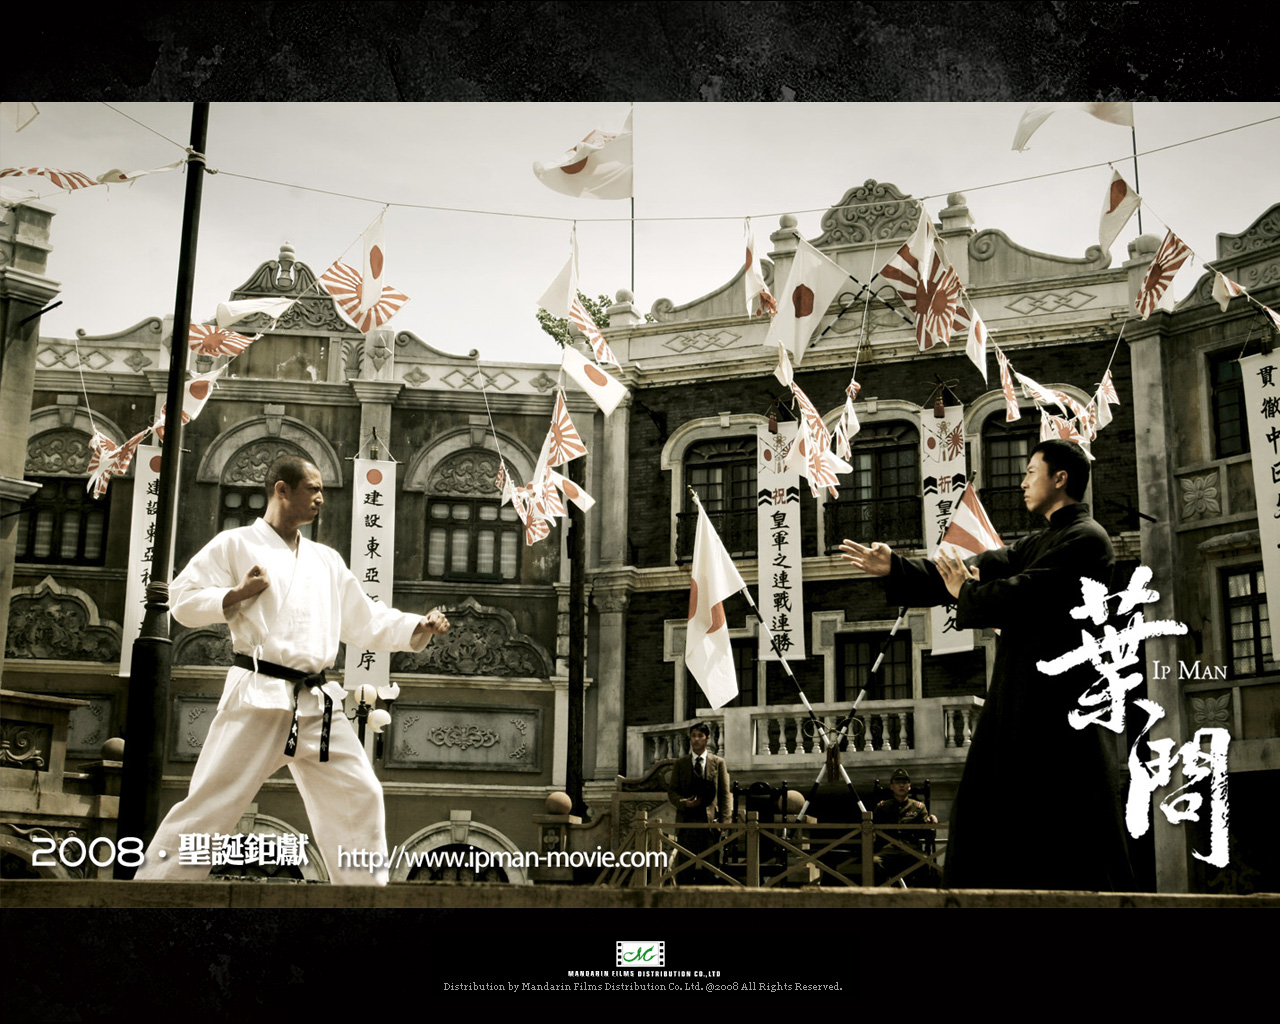 Ip Man wallpaper 08 in wallpapers album photos and posters in